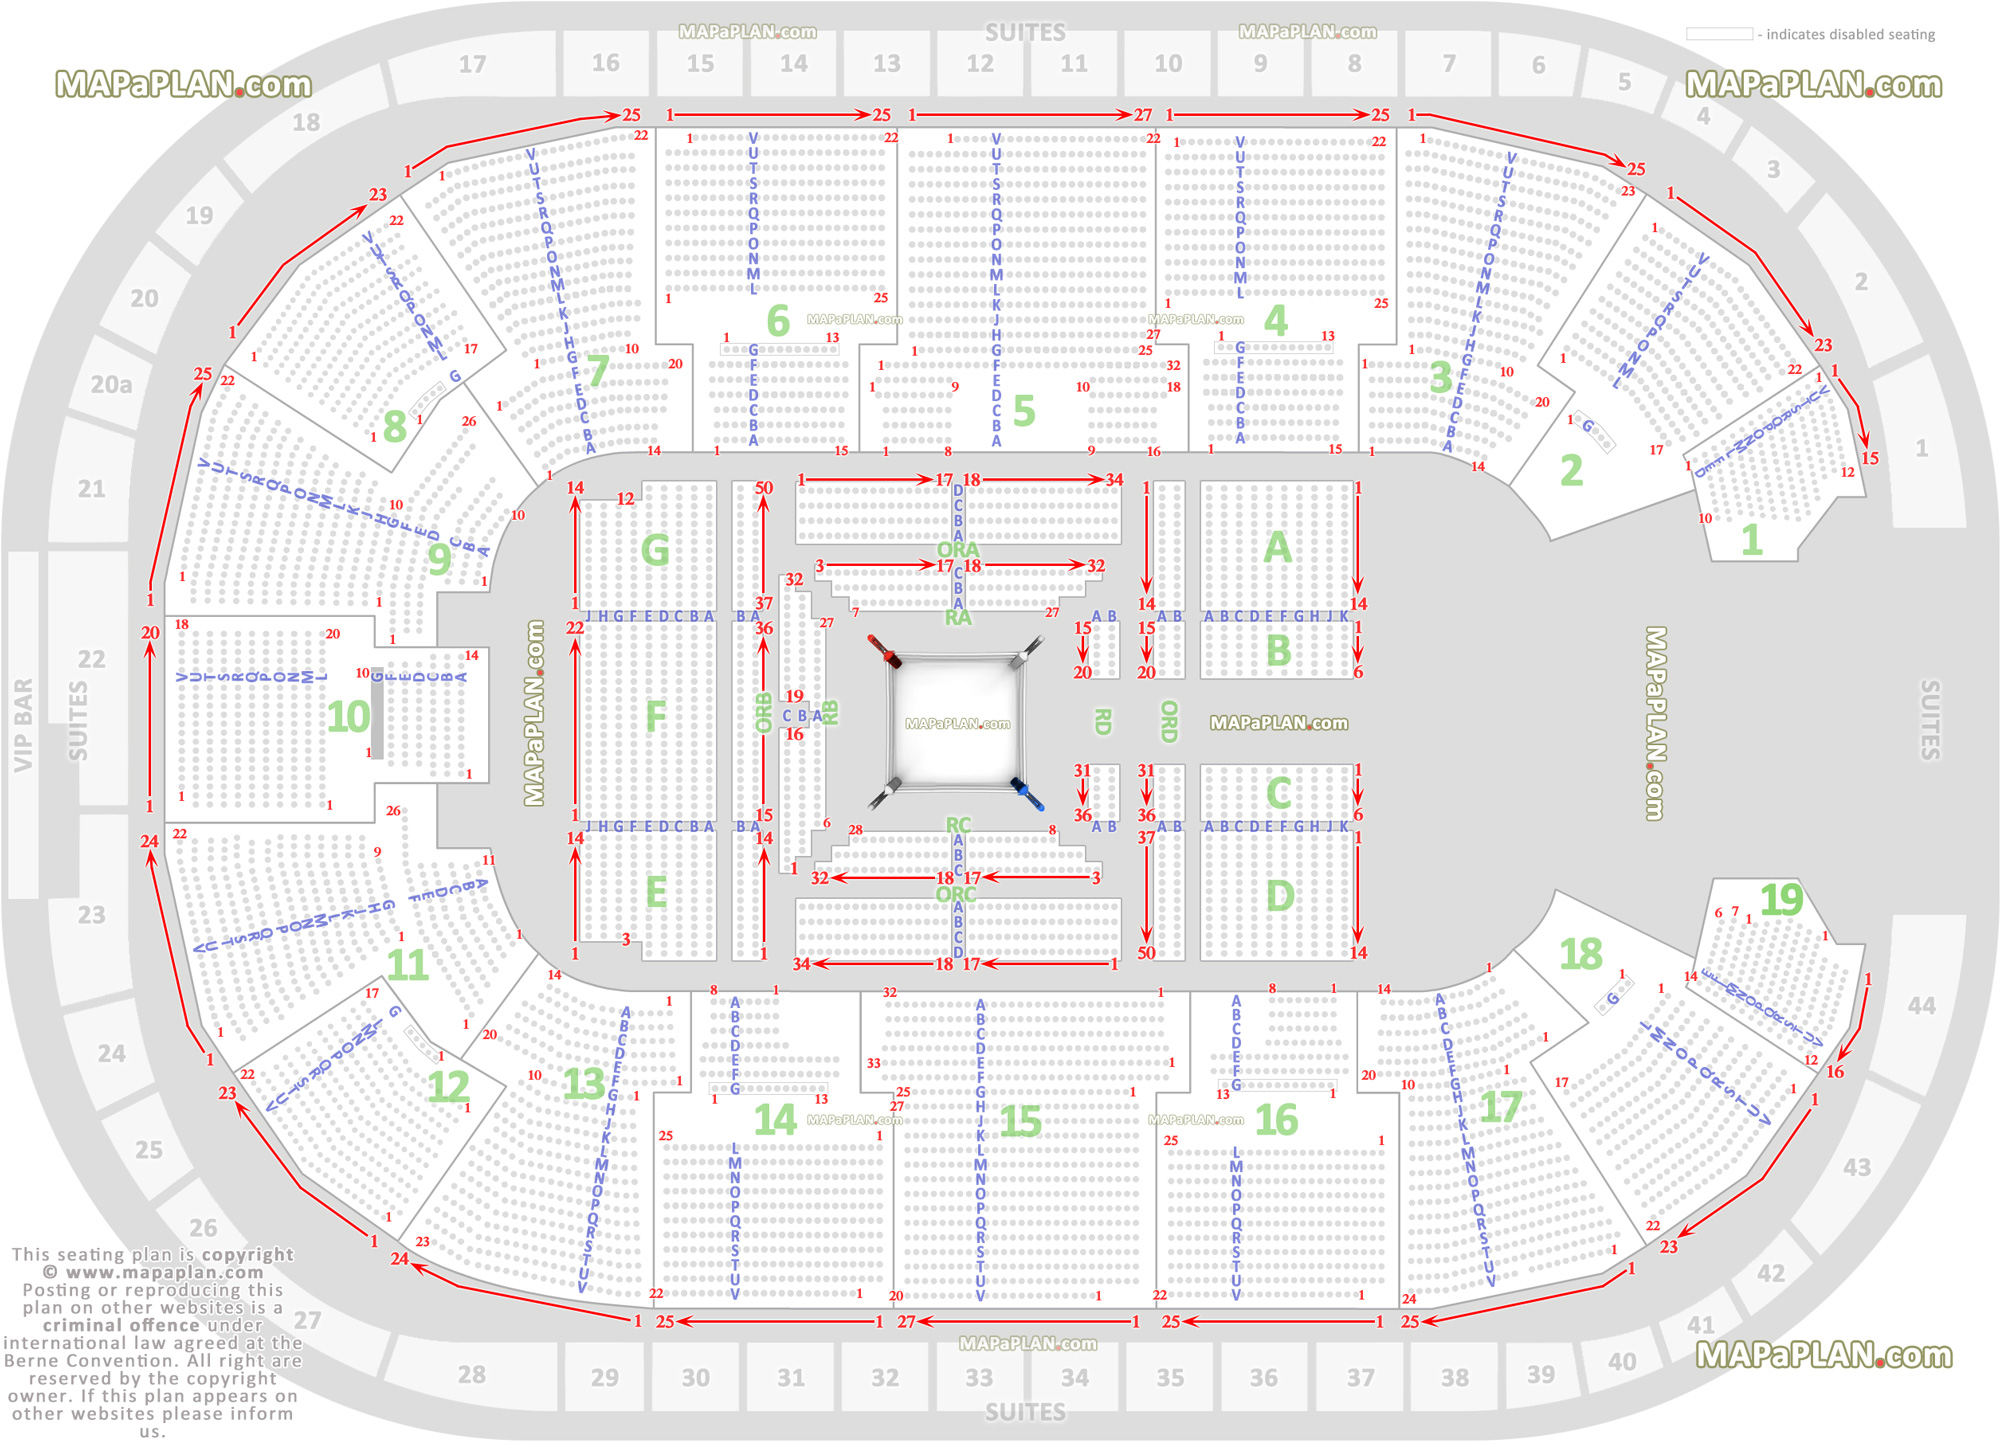 wwe tna wrestling boxing ufc layout showing good ringside lower upper tier sections diagram Nottingham Motorpoint Arena seating plan